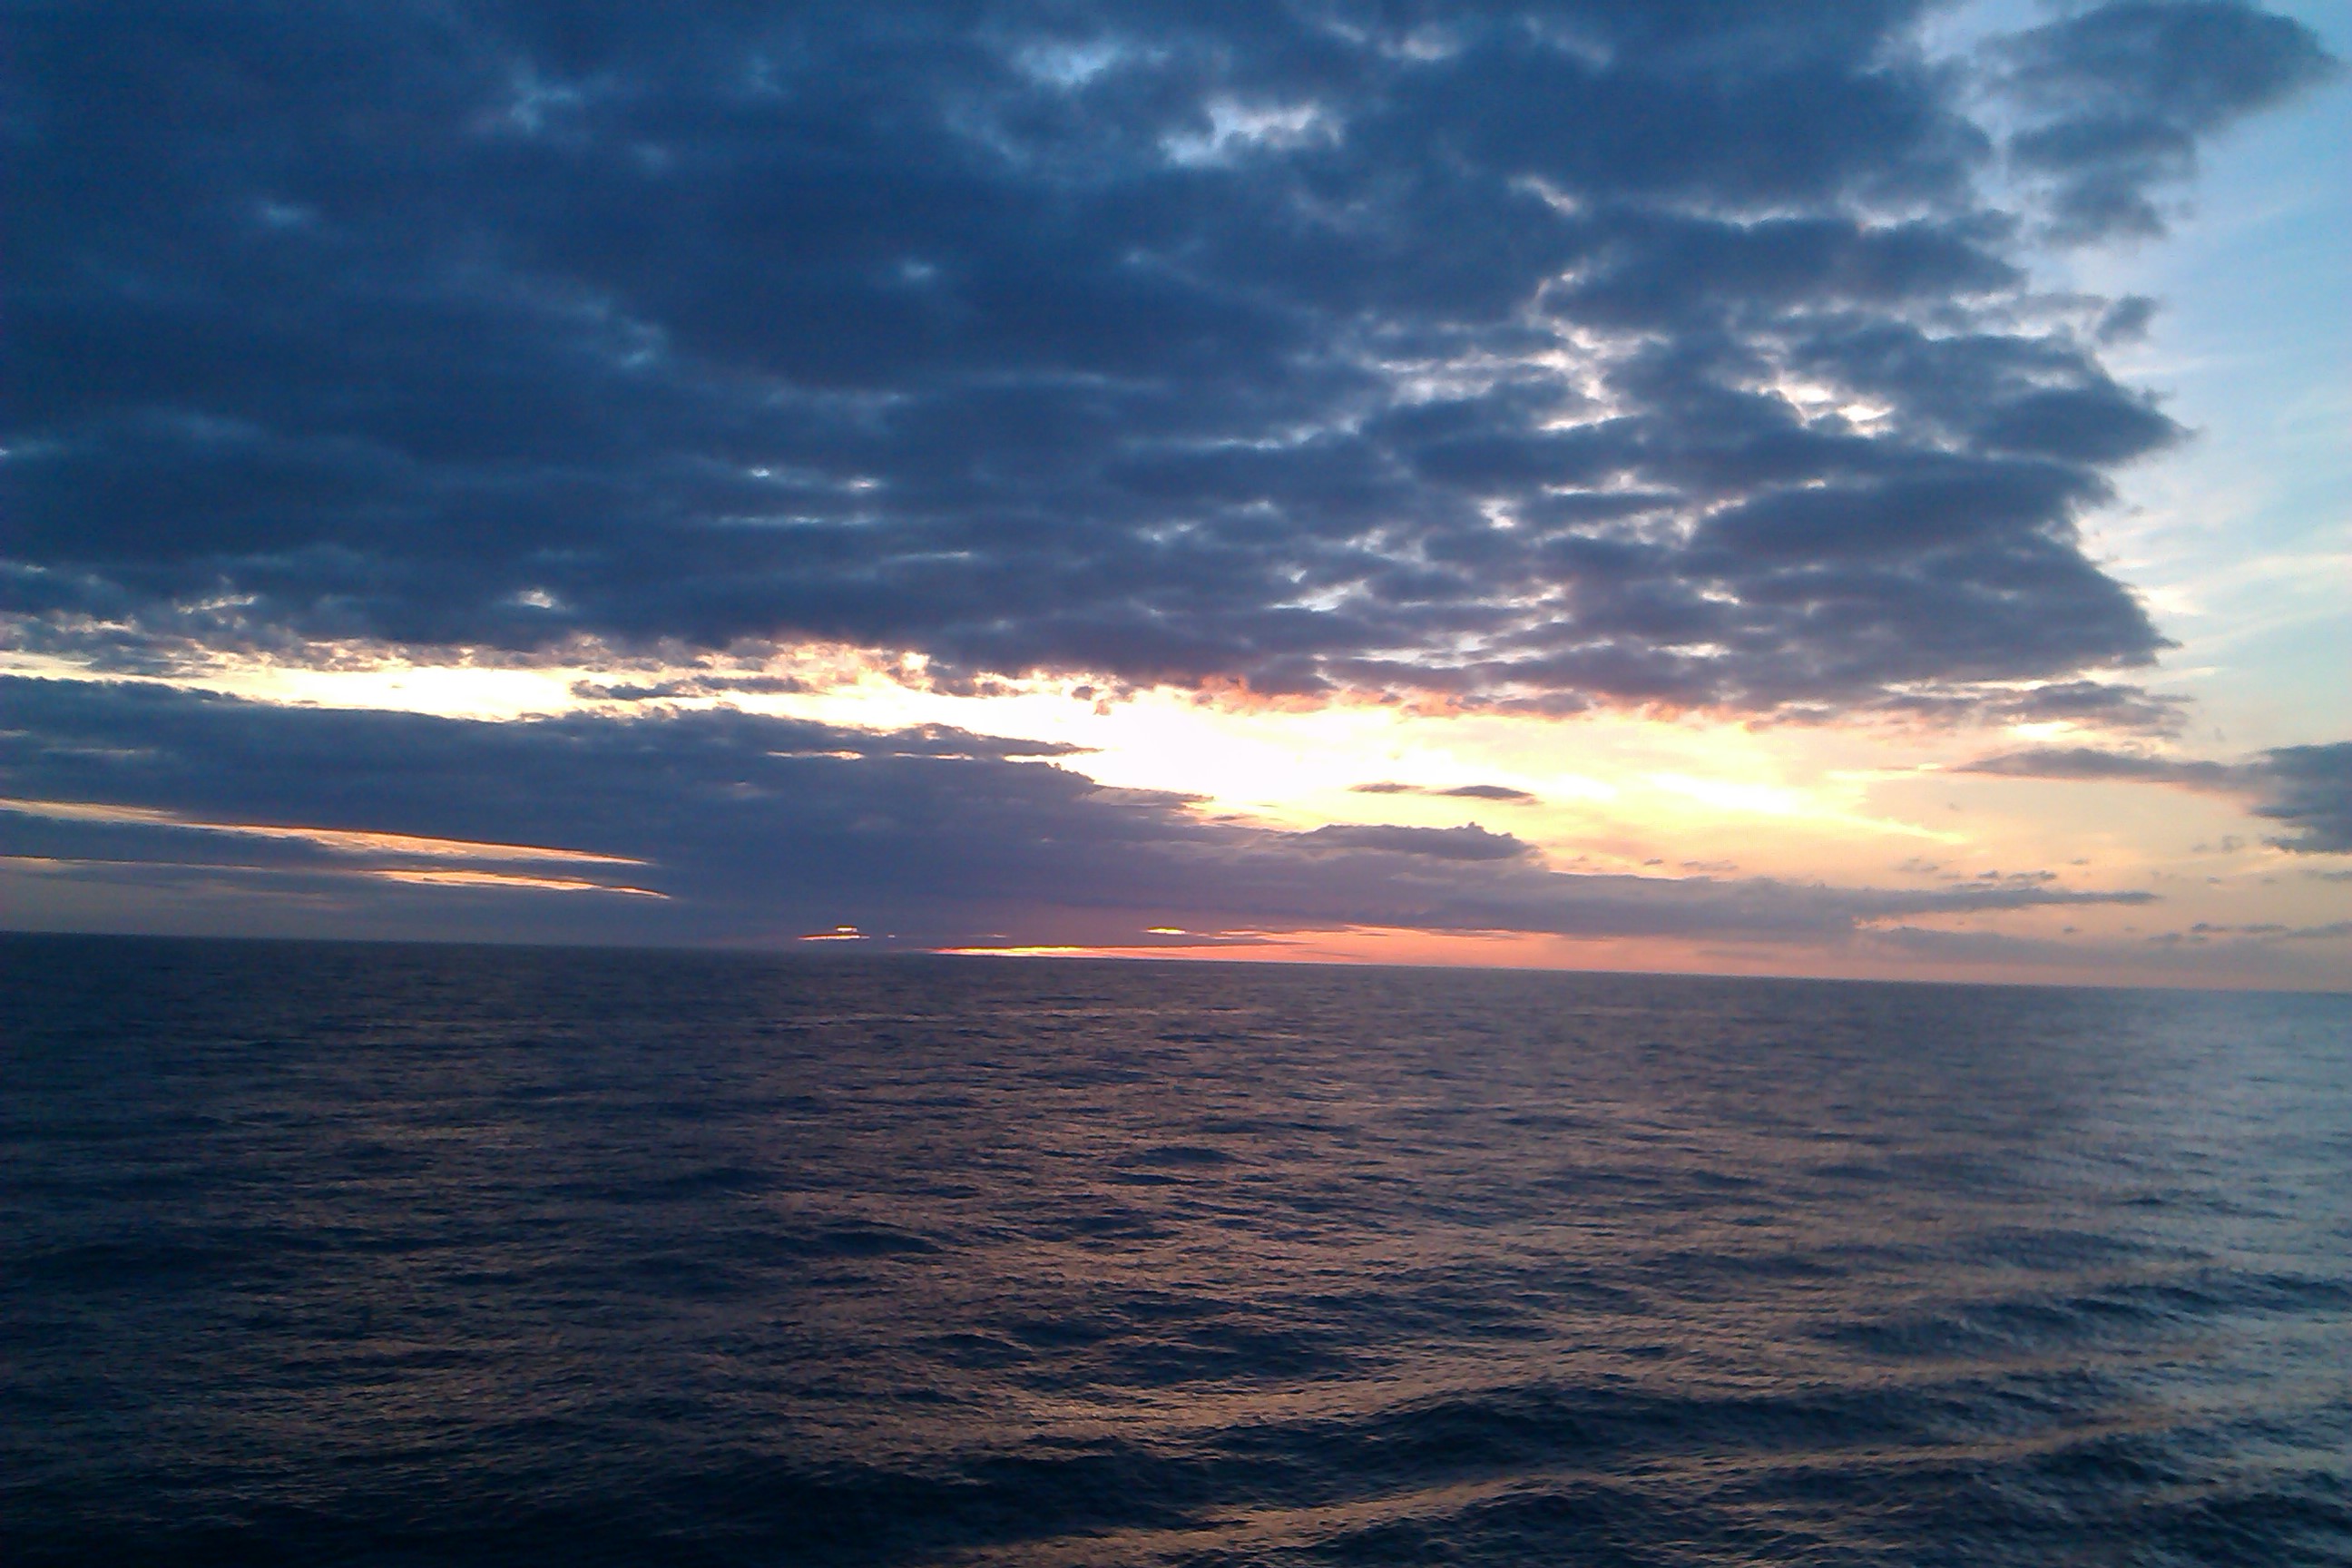 A pretty sunset from our #cruiseofamazingness